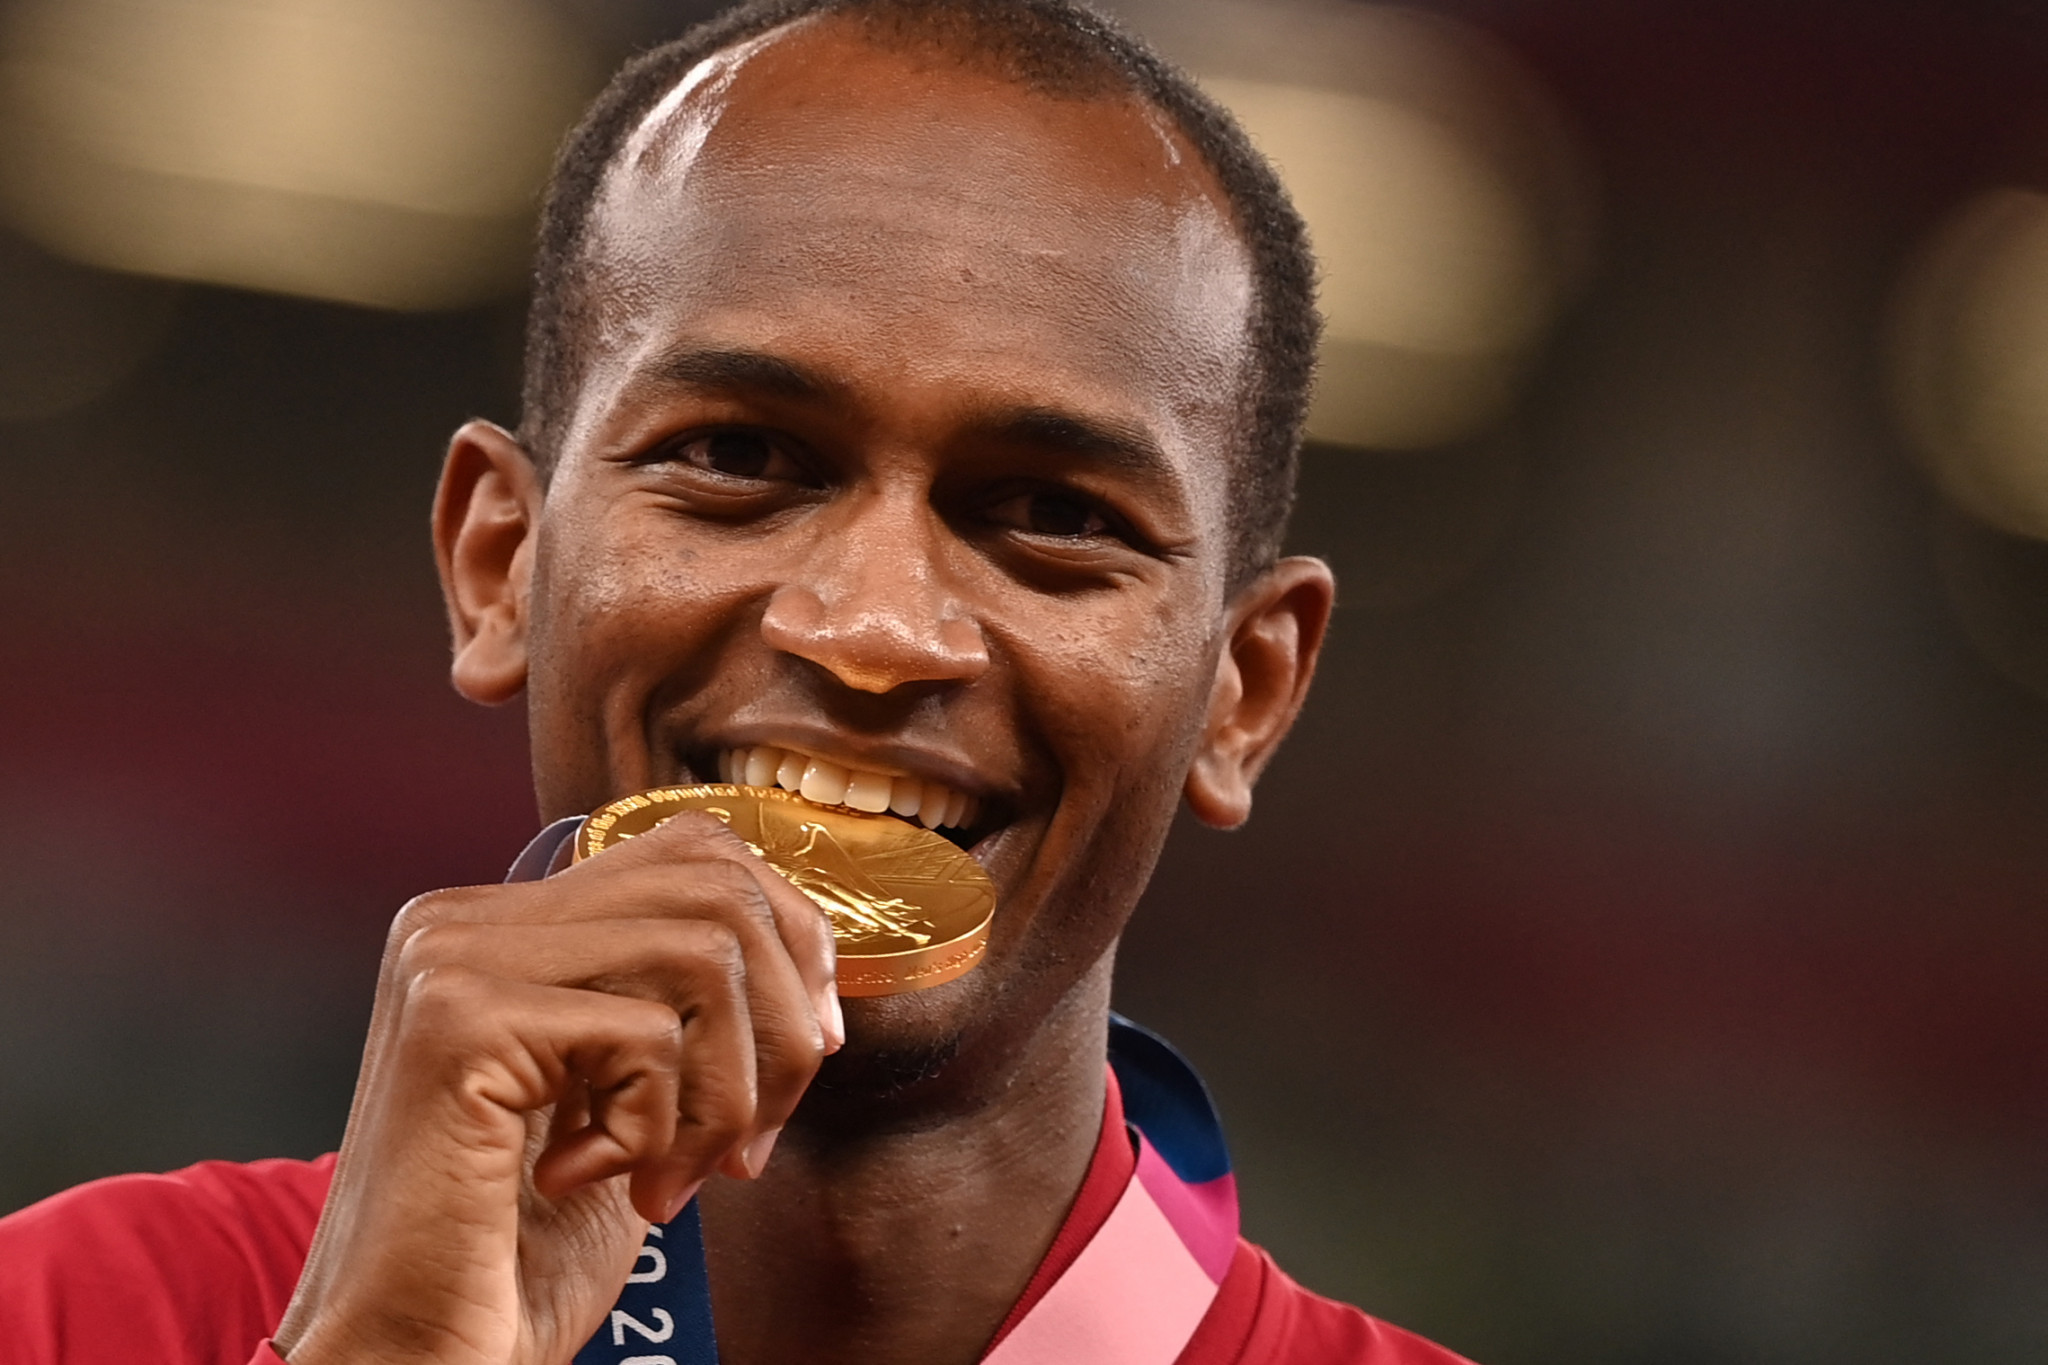 Qatar won two gold medals at the Tokyo 2020 Olympics, including Mutaz Essa Barshim in the men's high jump ©Getty Images